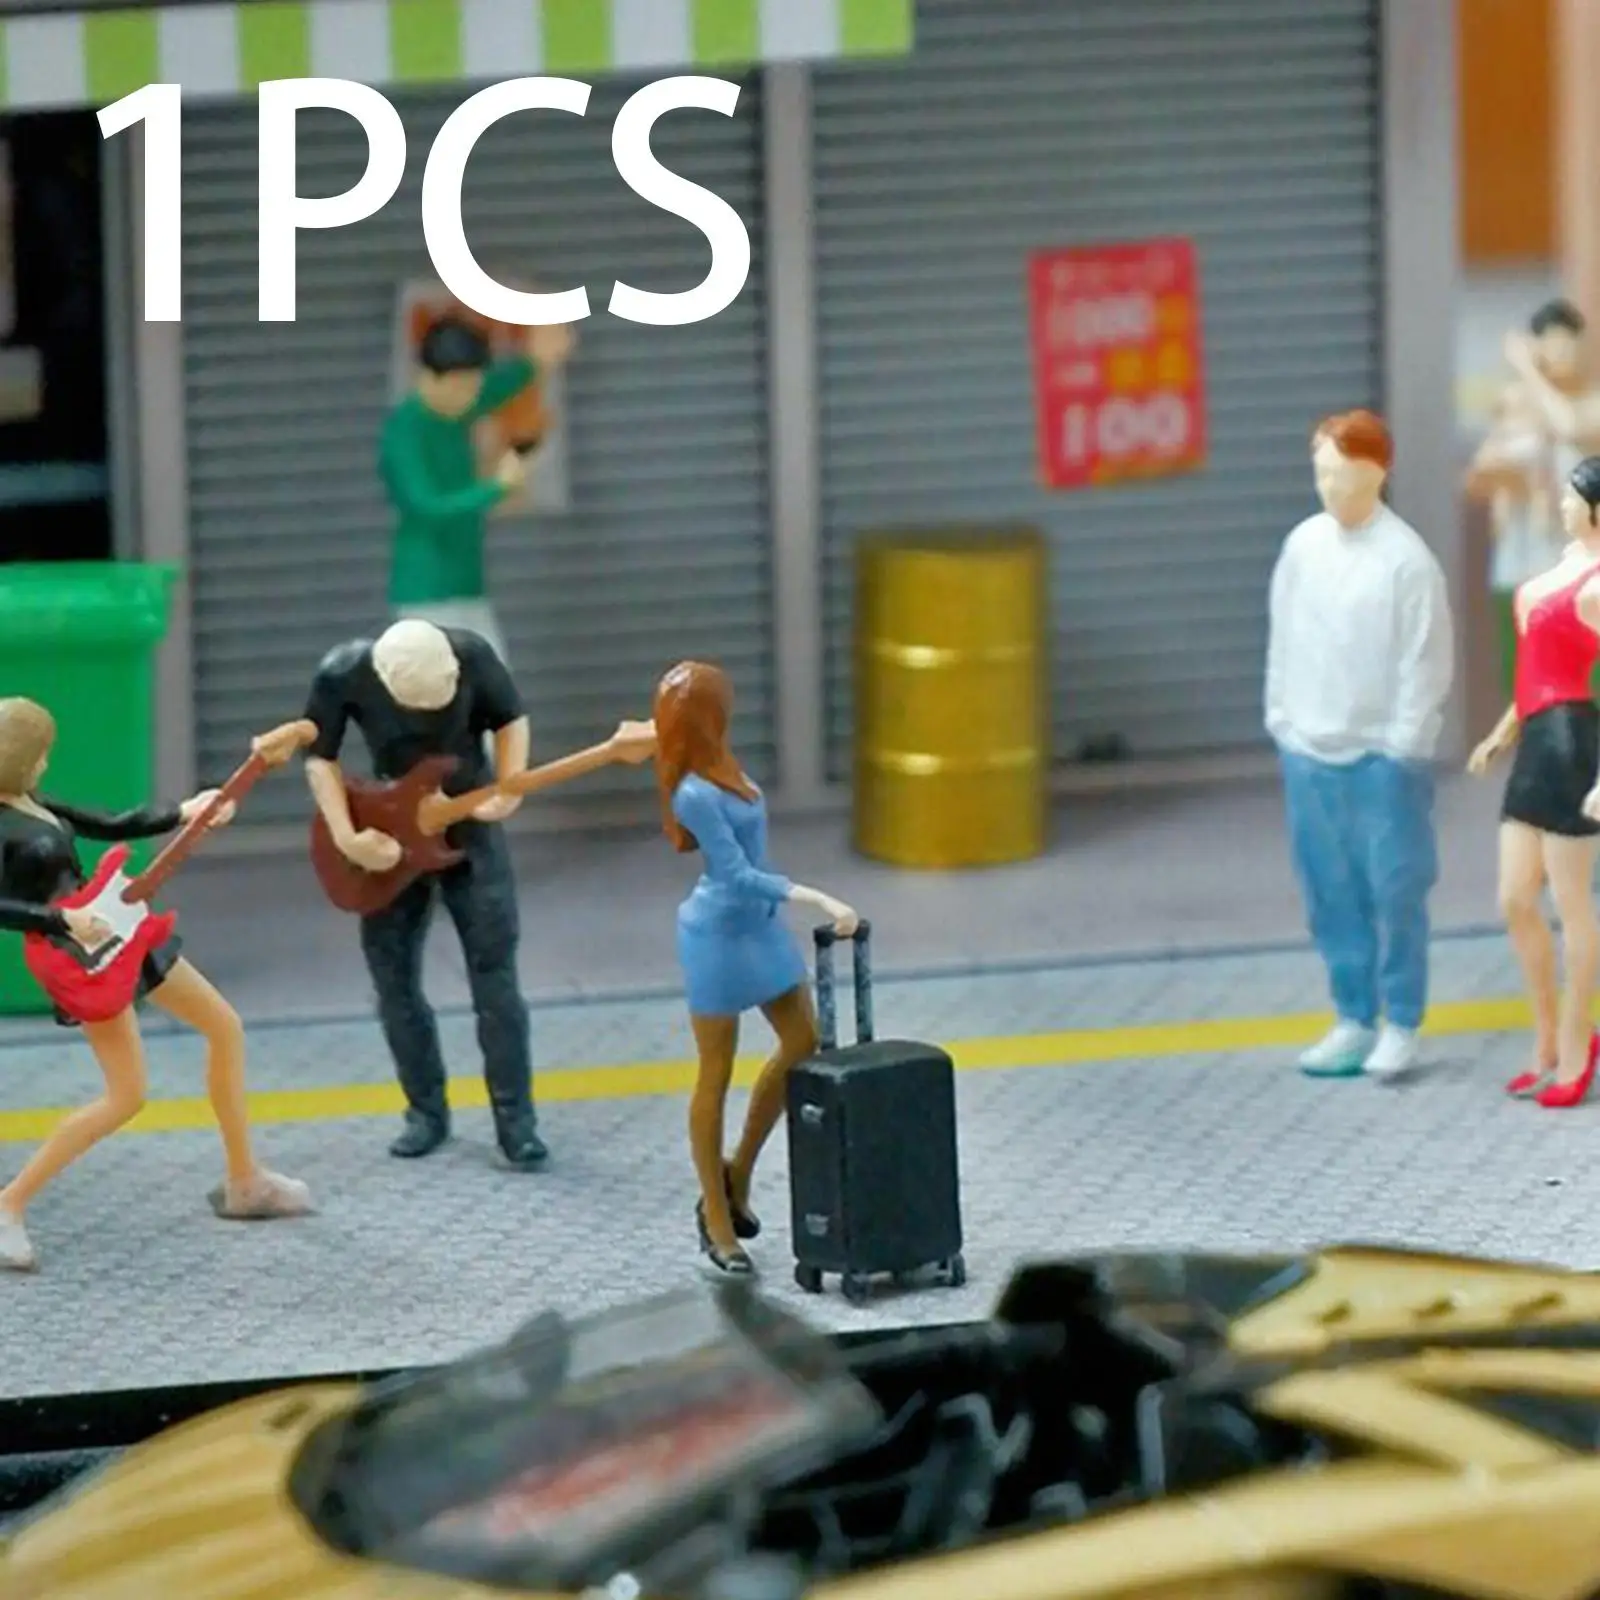 1:64 Scale Girl Figures with Suitcase Resin Role Play Figure Props People Figure Layout for Train Station Layout Miniature Scene